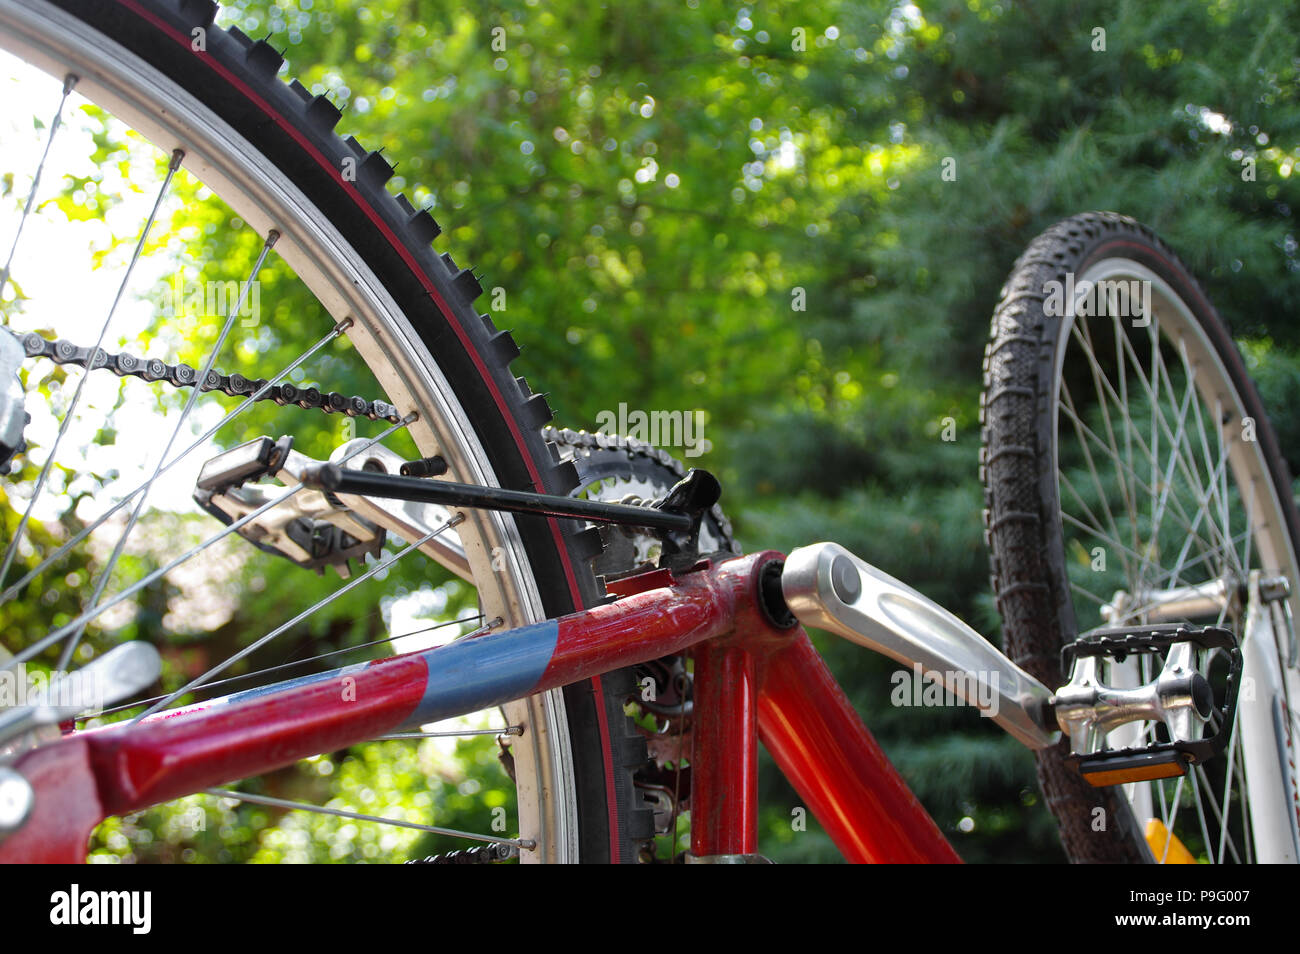 Bicycle upside down and ready for maintenance and repair Stock Photo